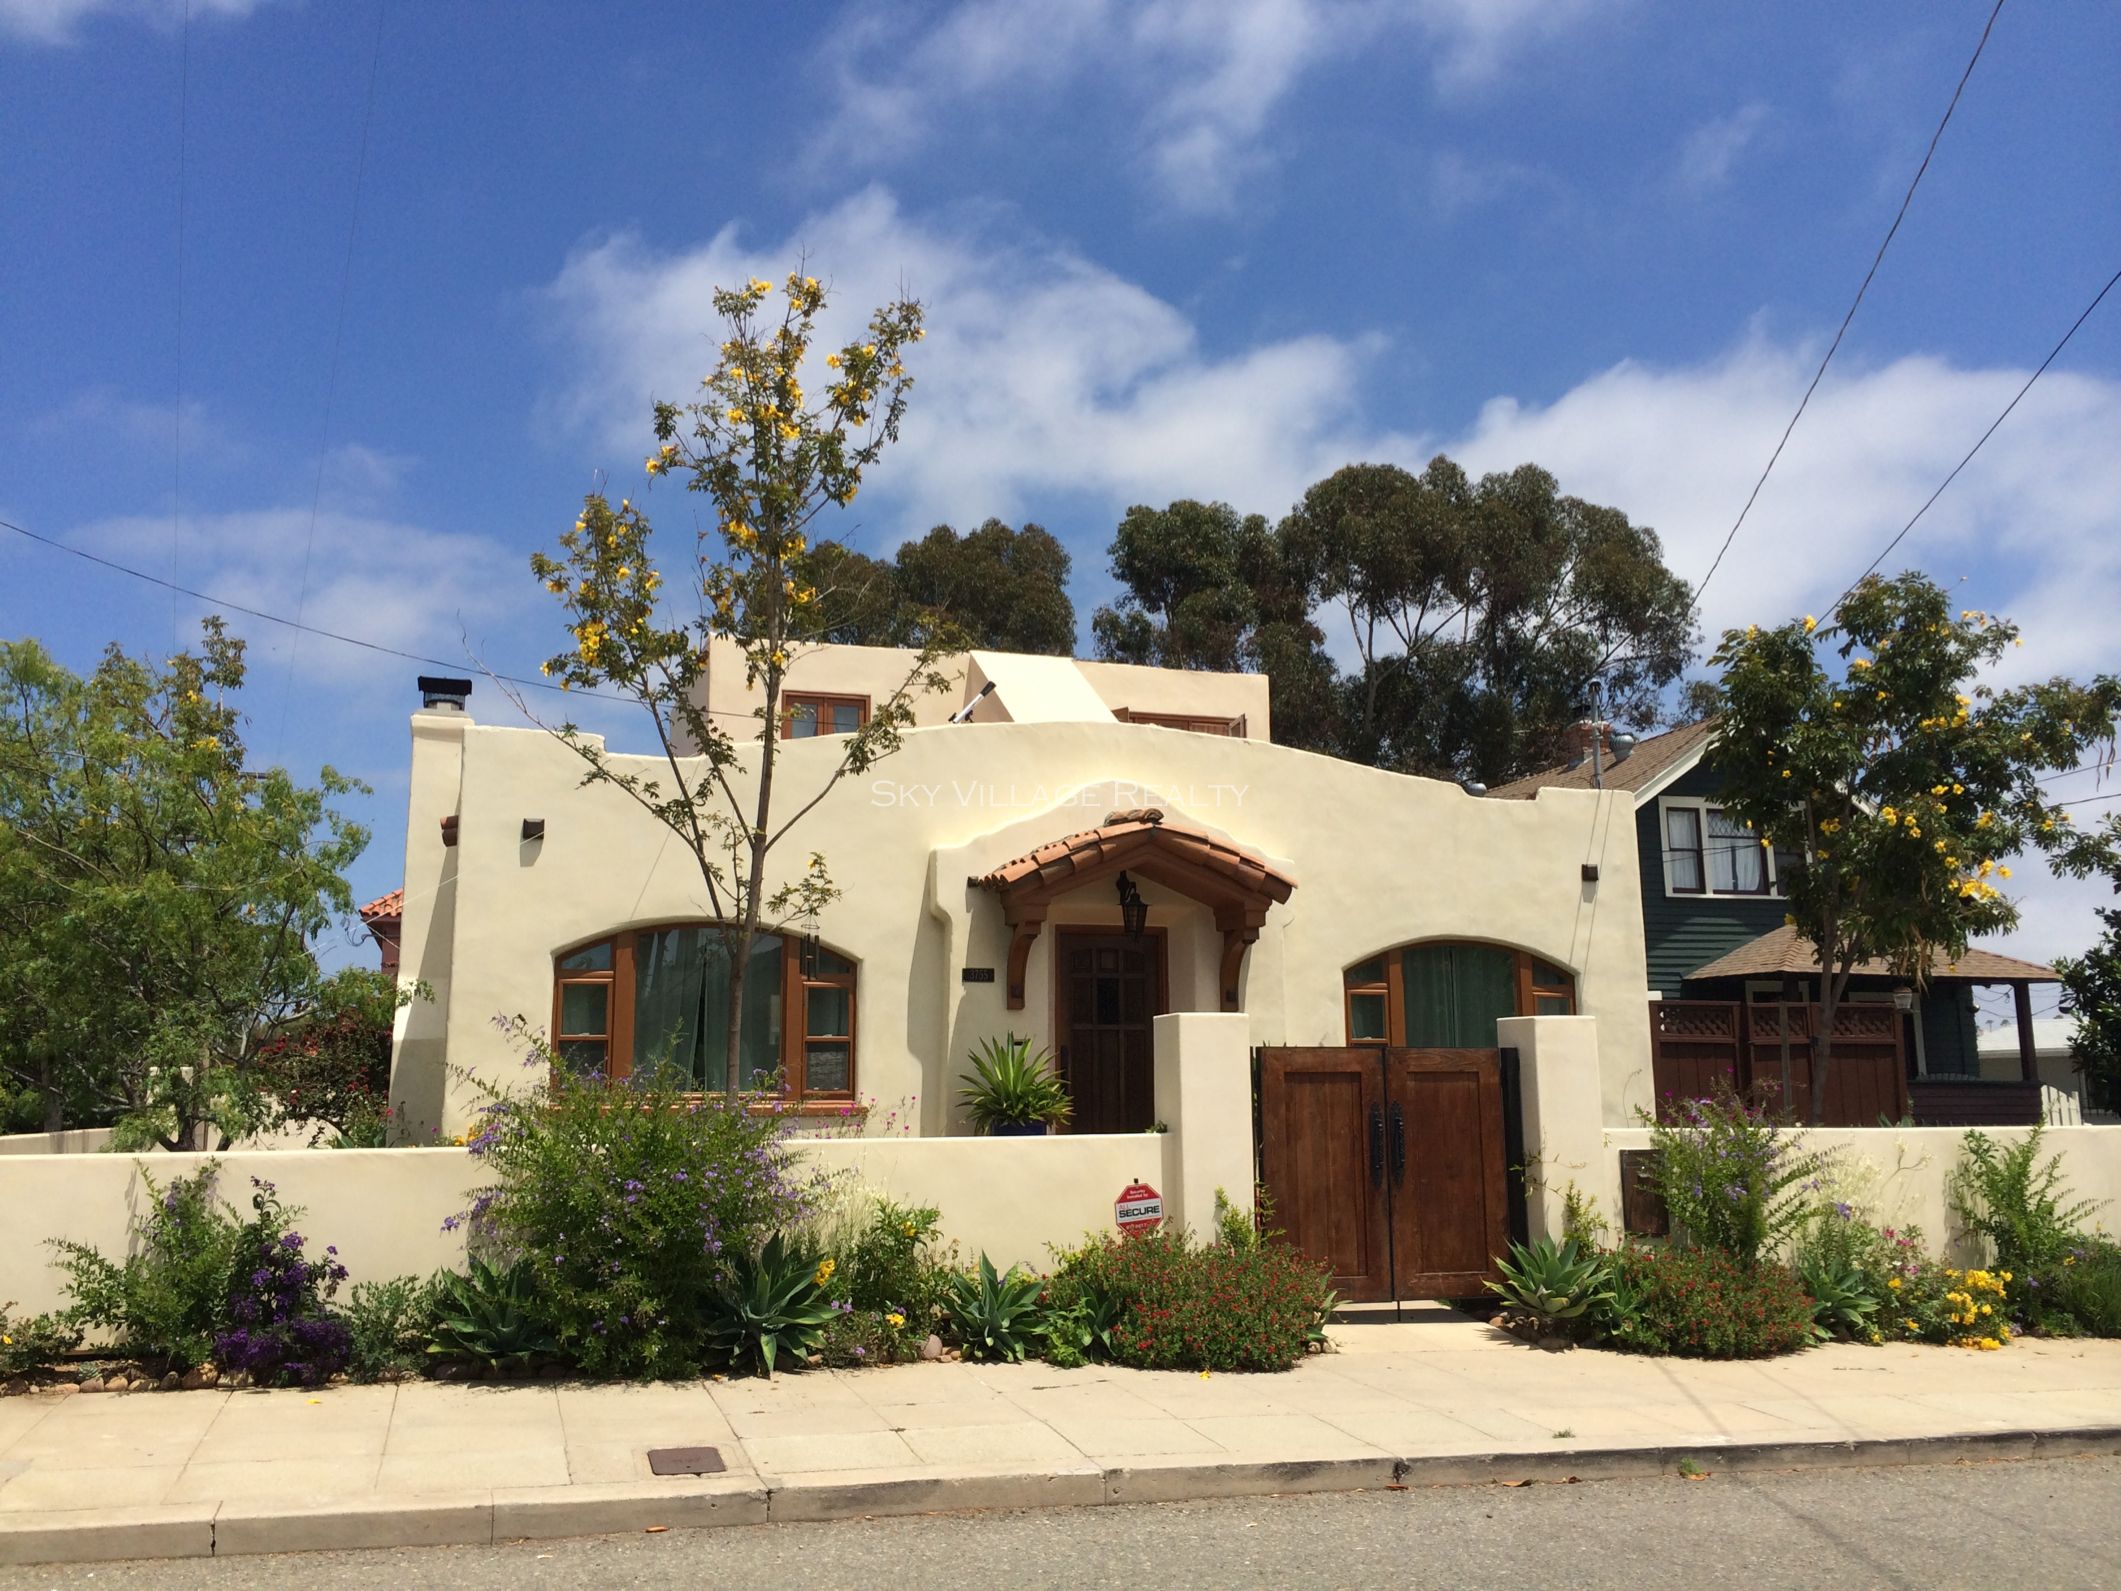 Property in Mission Hills San Diego